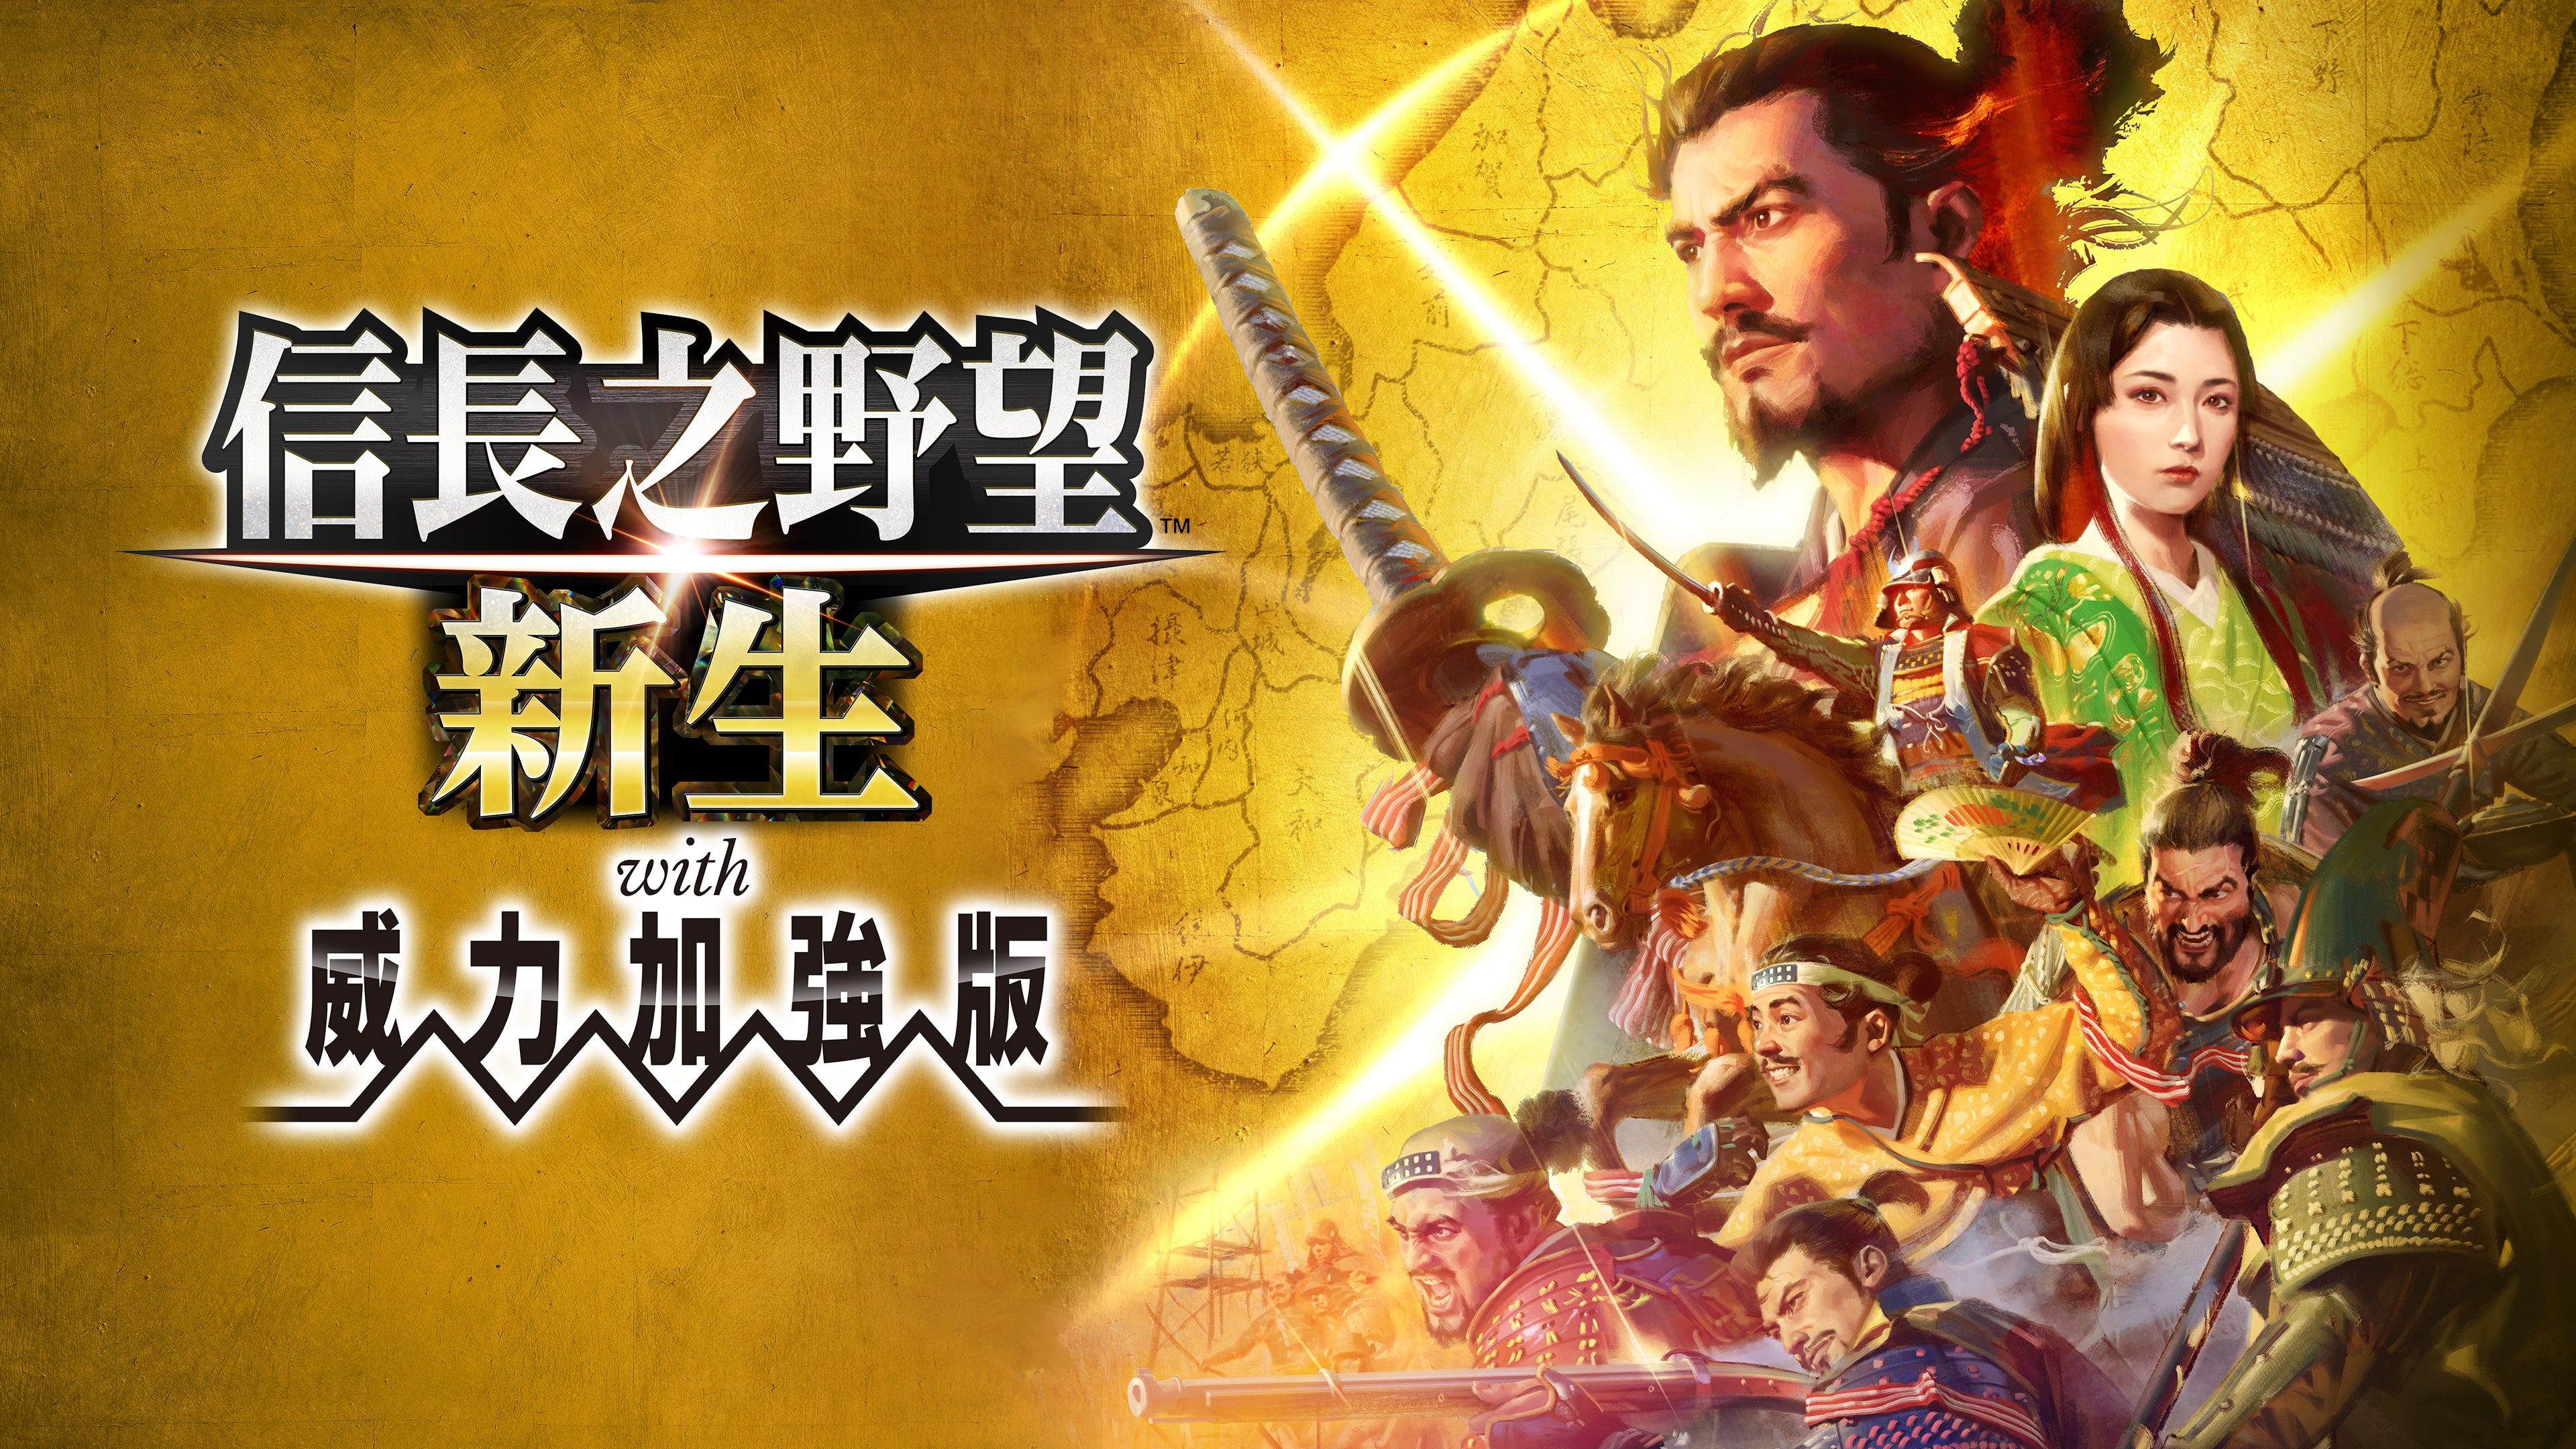 NOBUNAGA'S AMBITION: Shinsei with Power Up Kit (Simplified Chinese